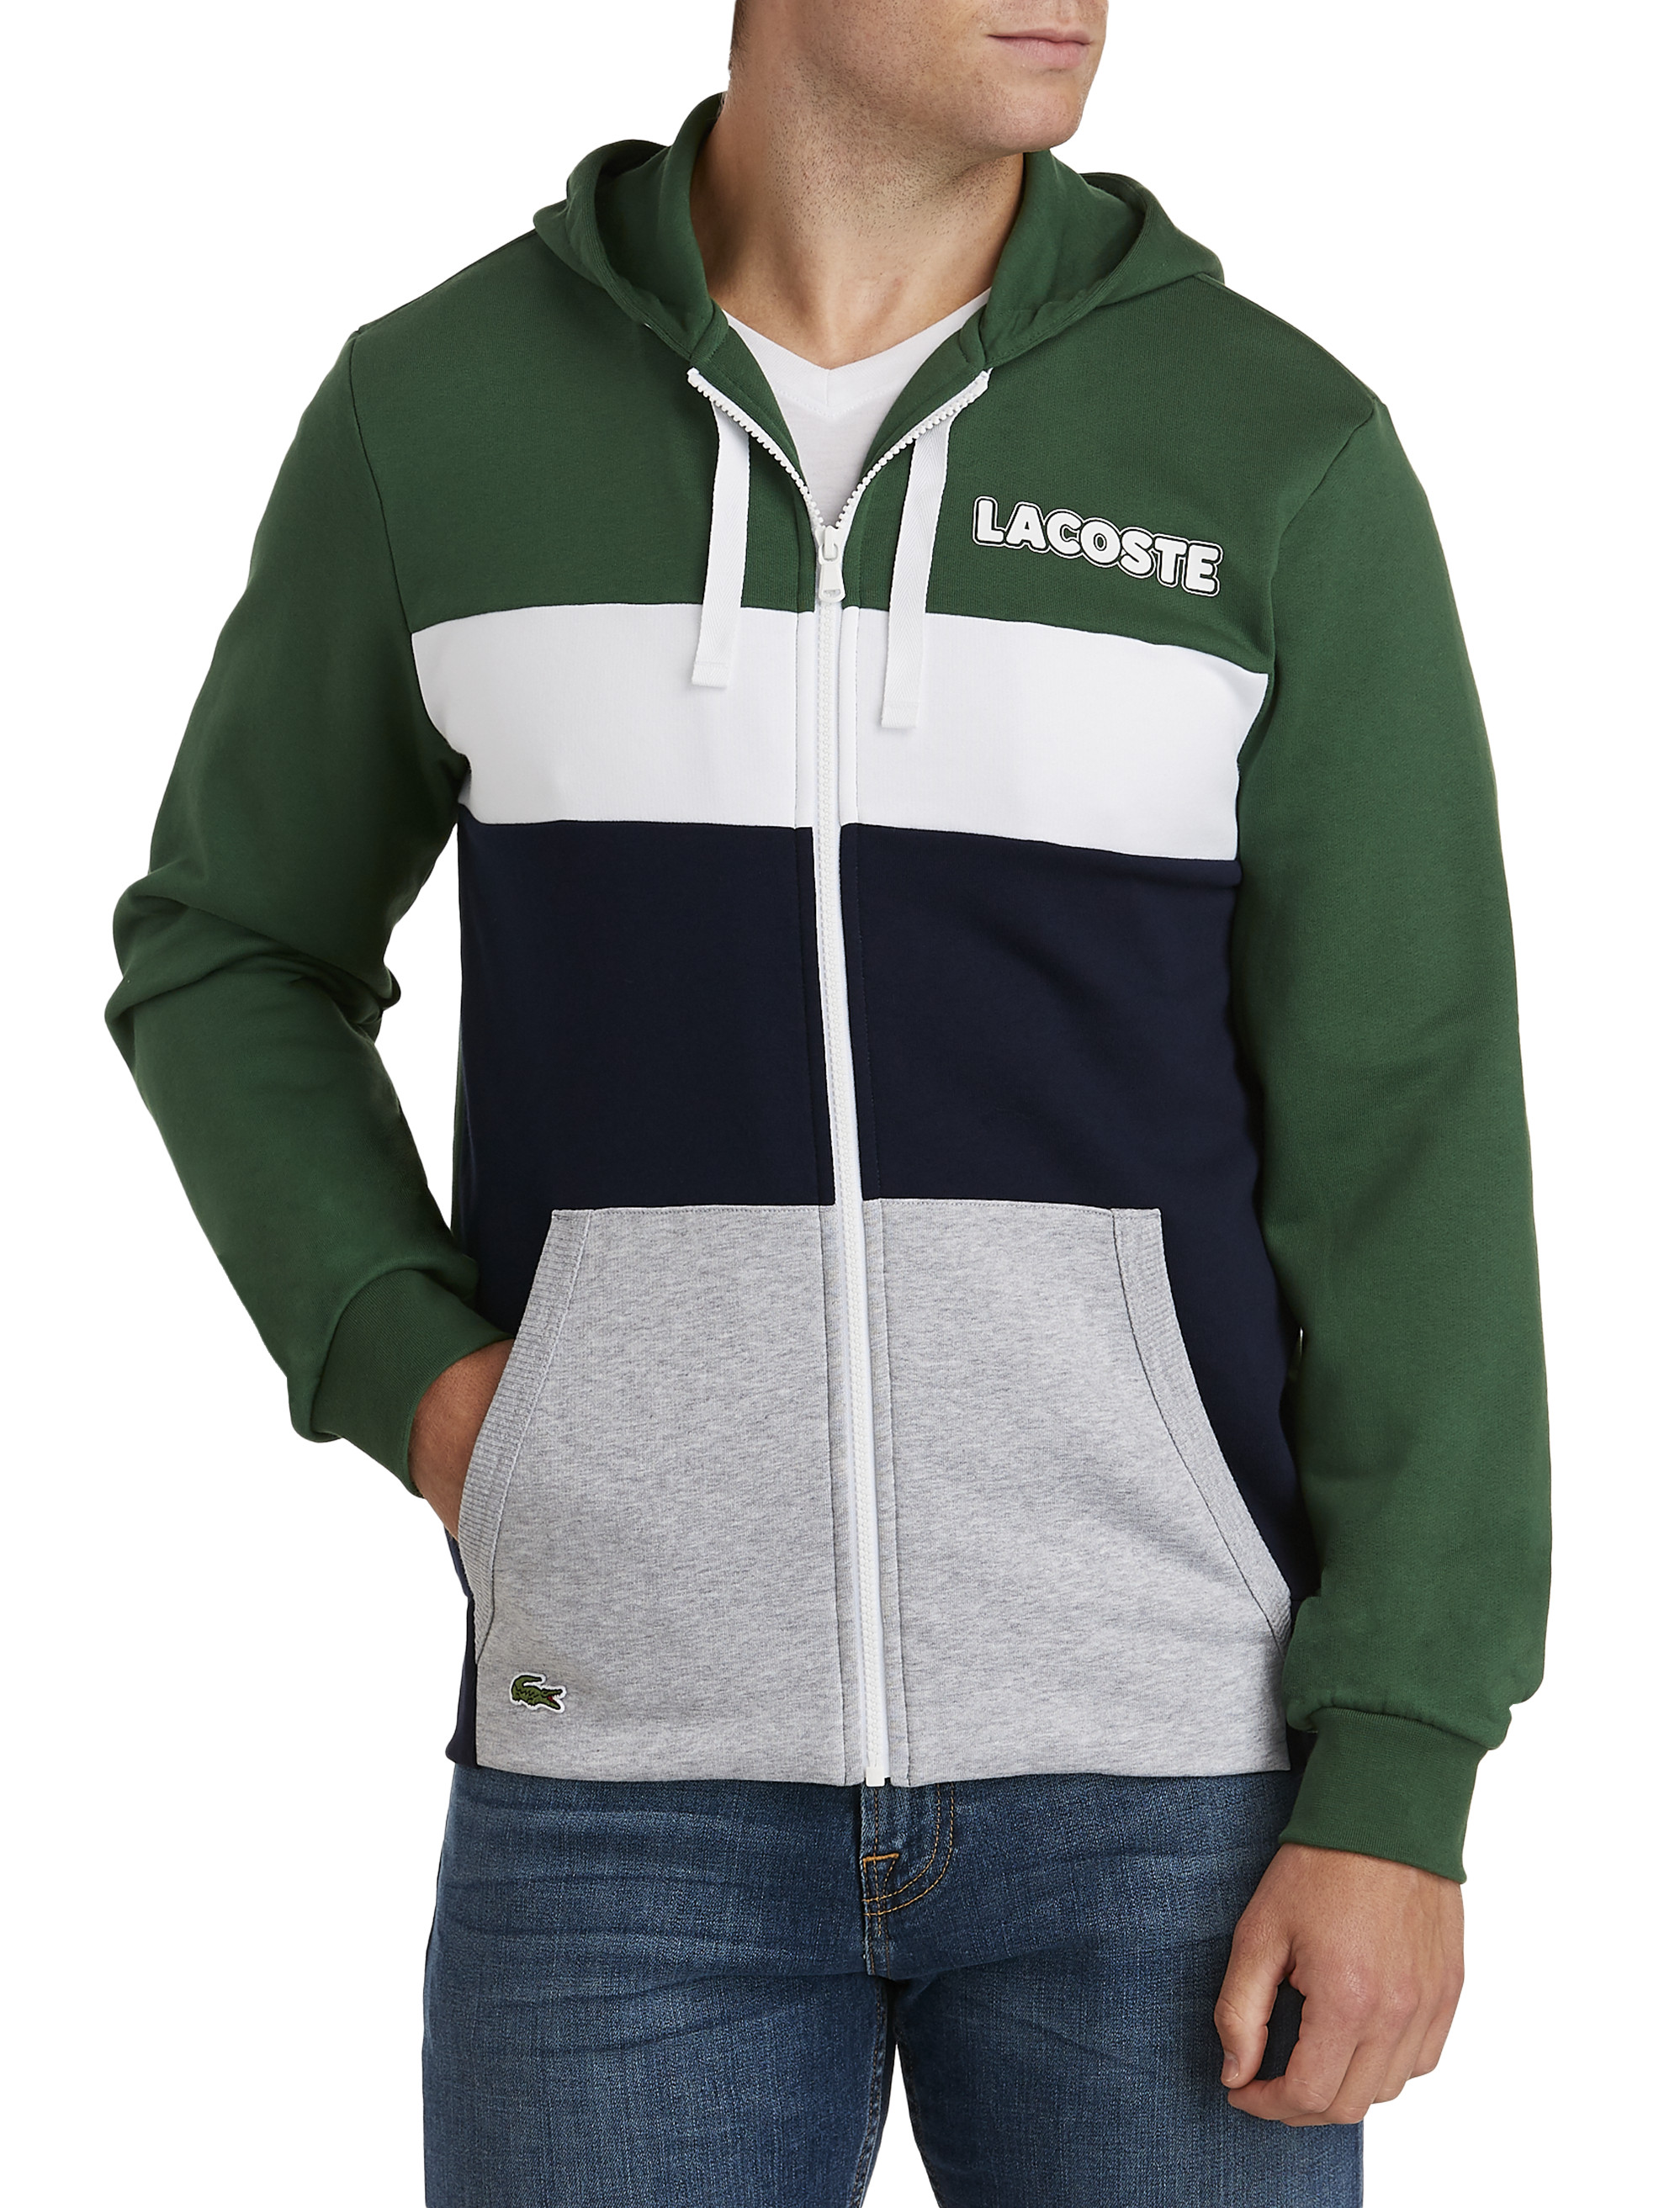 lacoste tall sizes